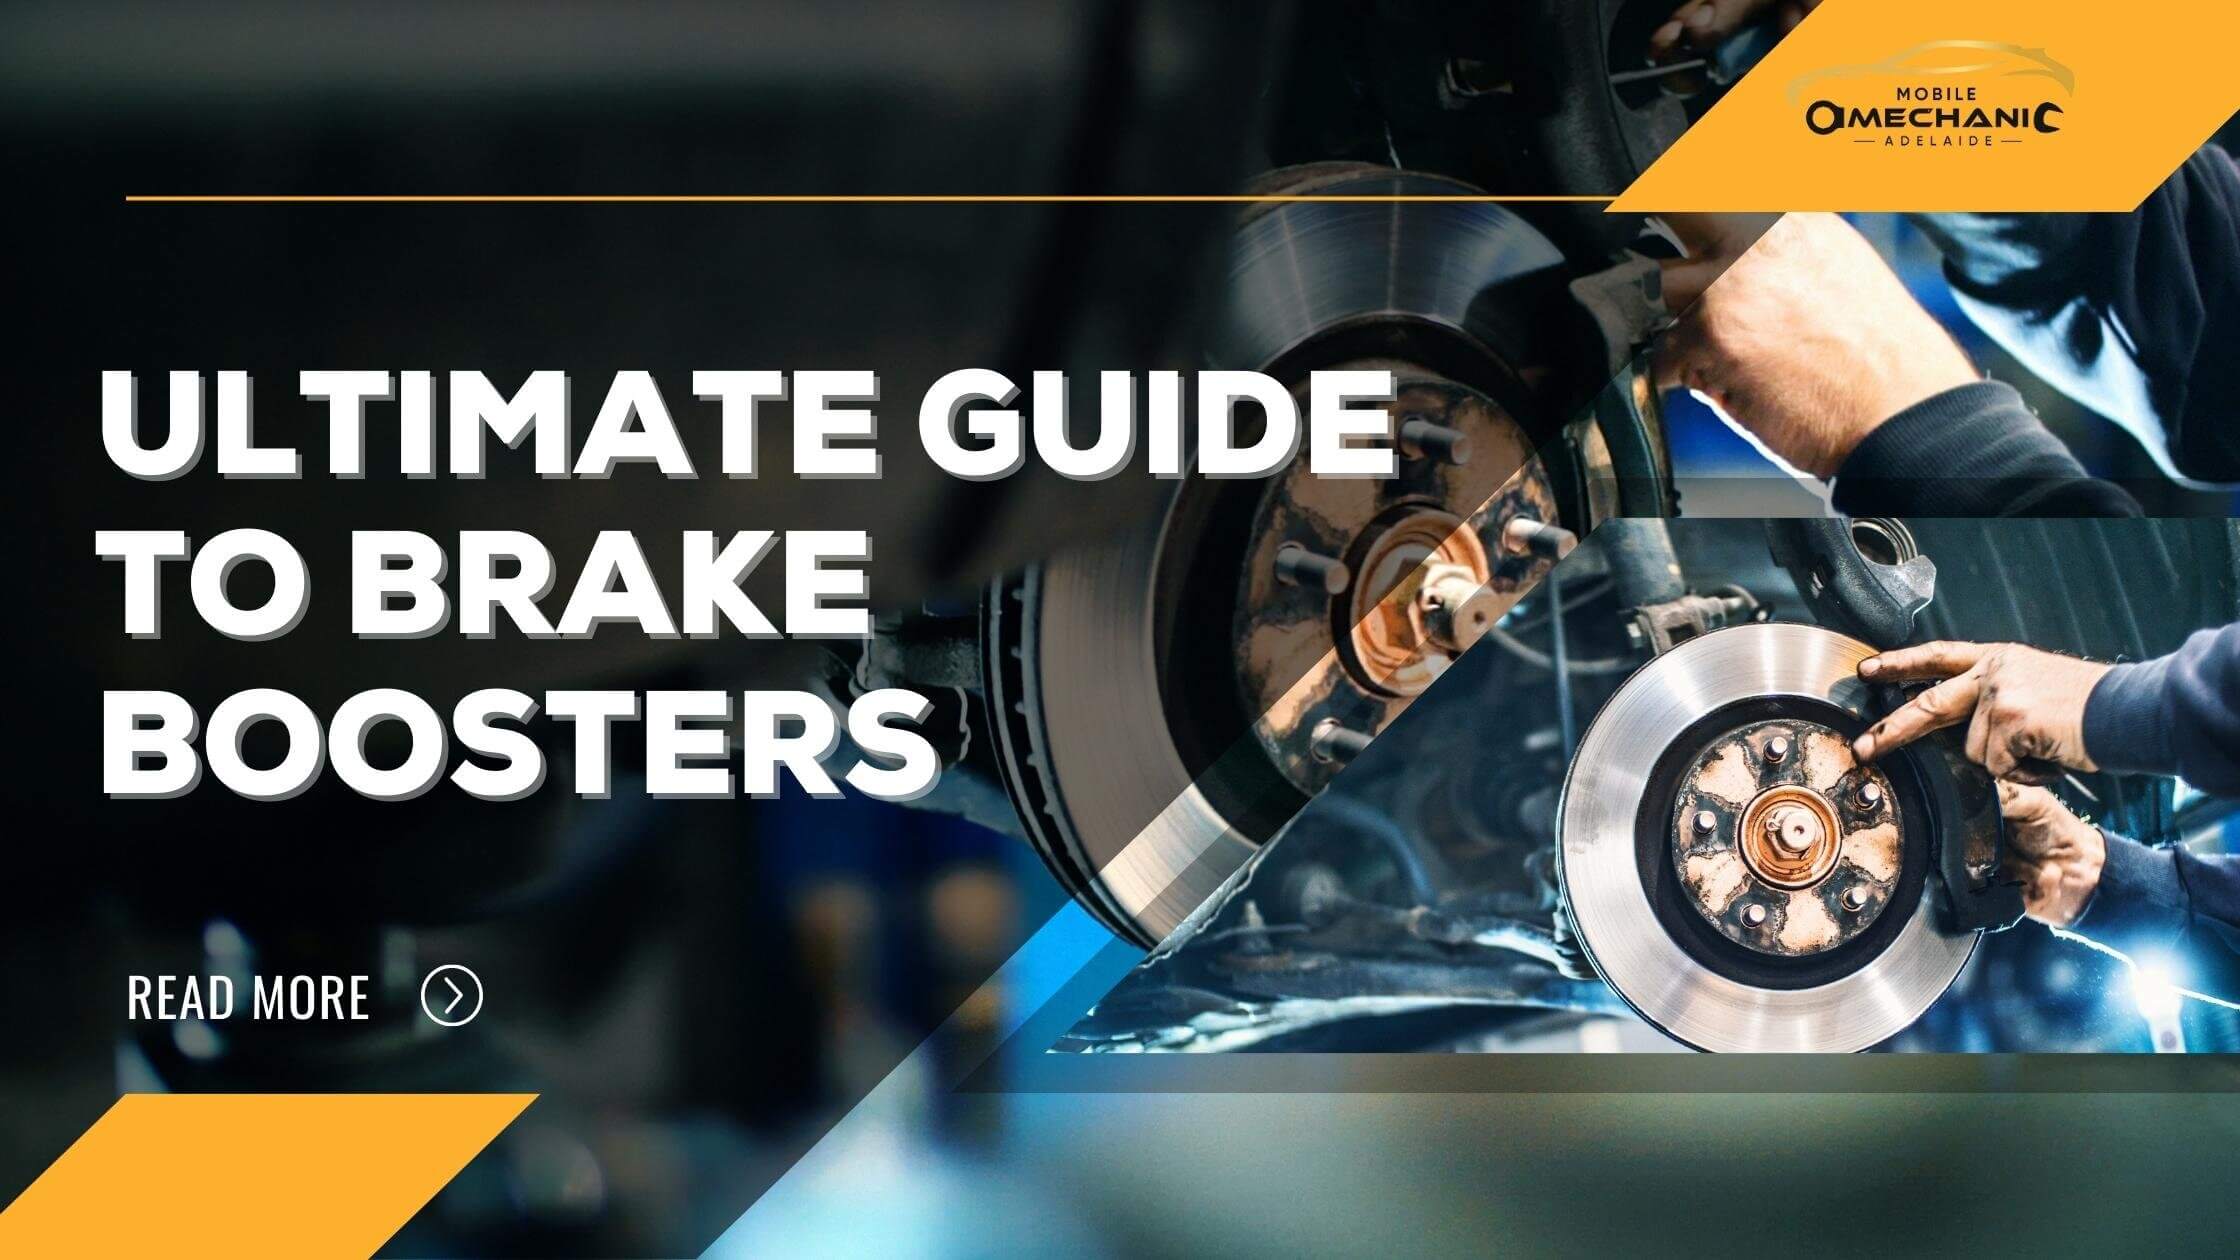 Ultimate Guide to Brake Boosters